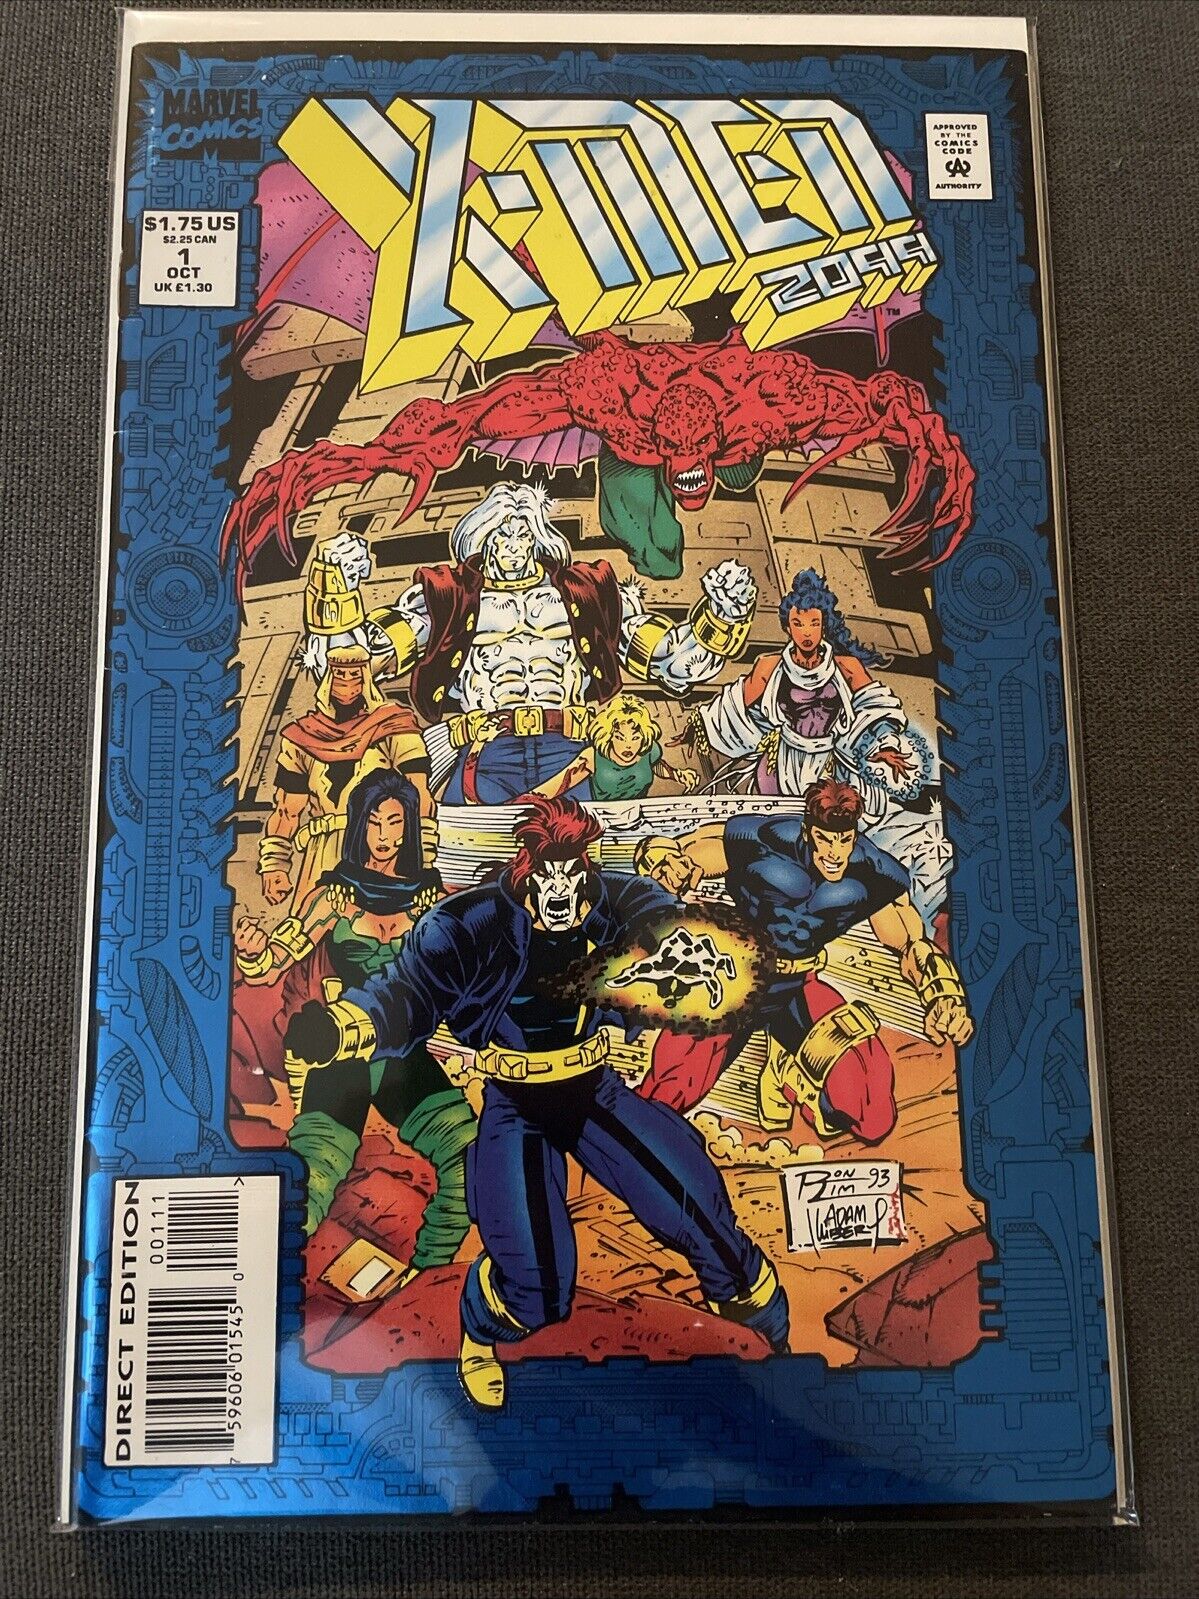 Marvel - X-MEN 2099 #1 (Great Condition) bagged and boarded